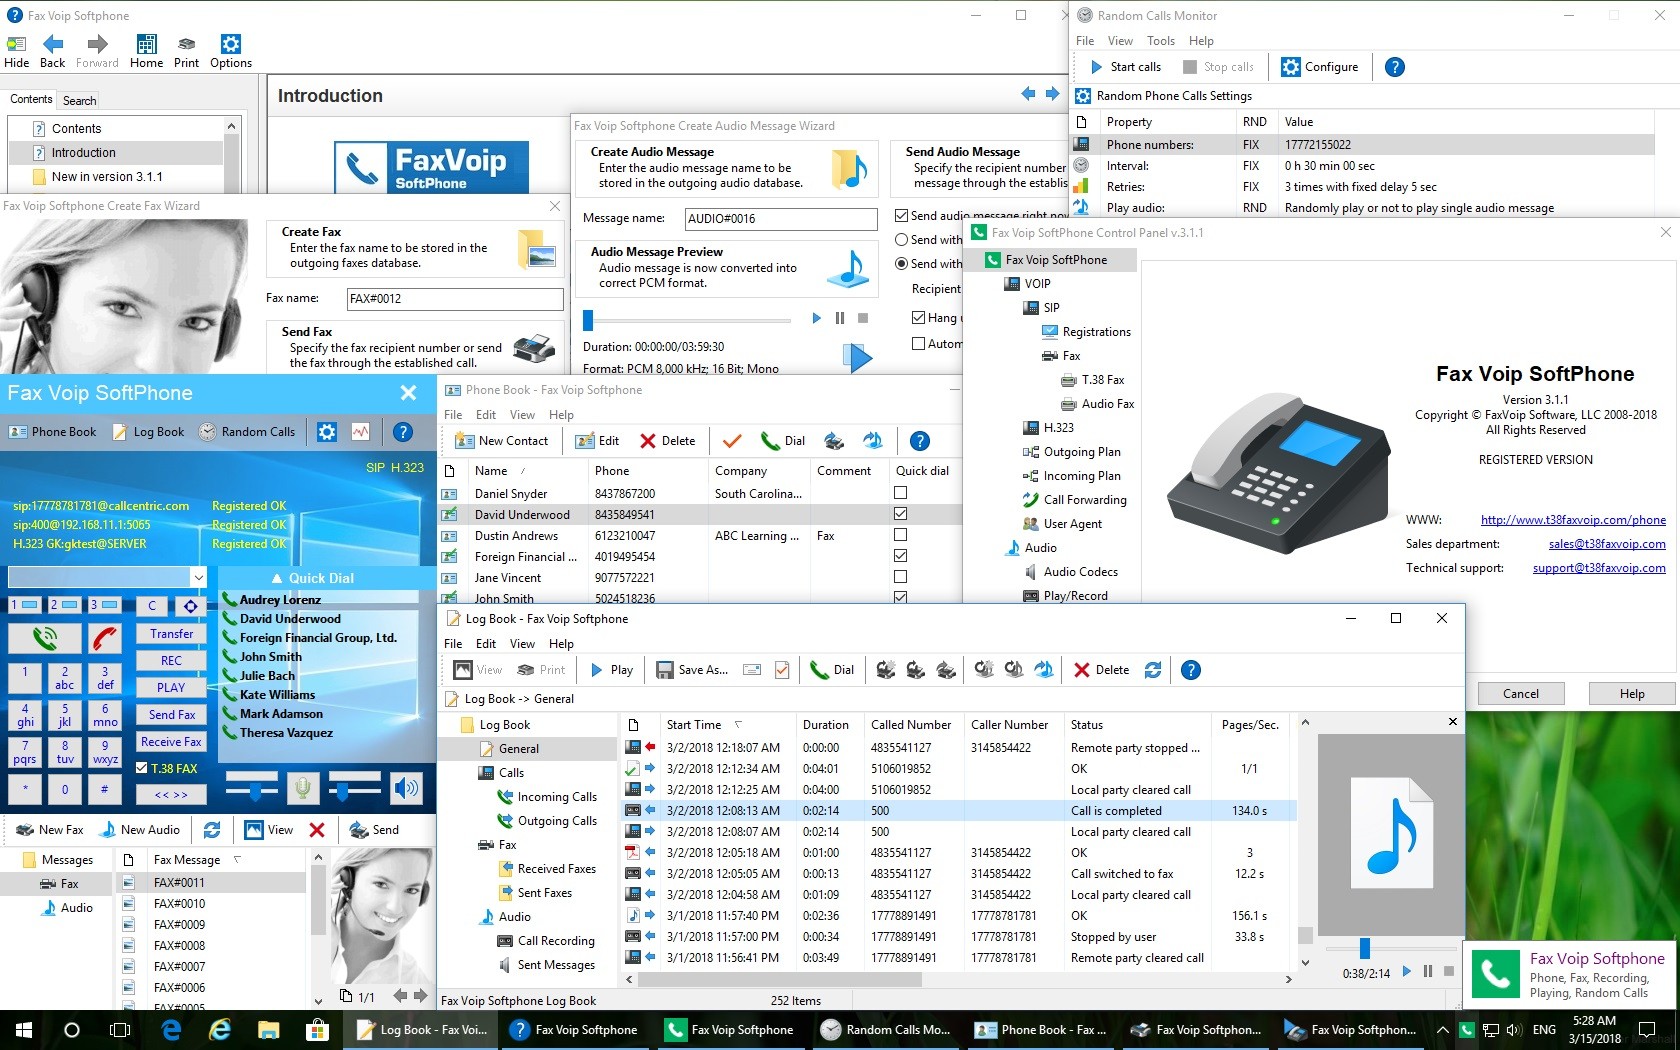 Fax Voip Softphone 3.1.1